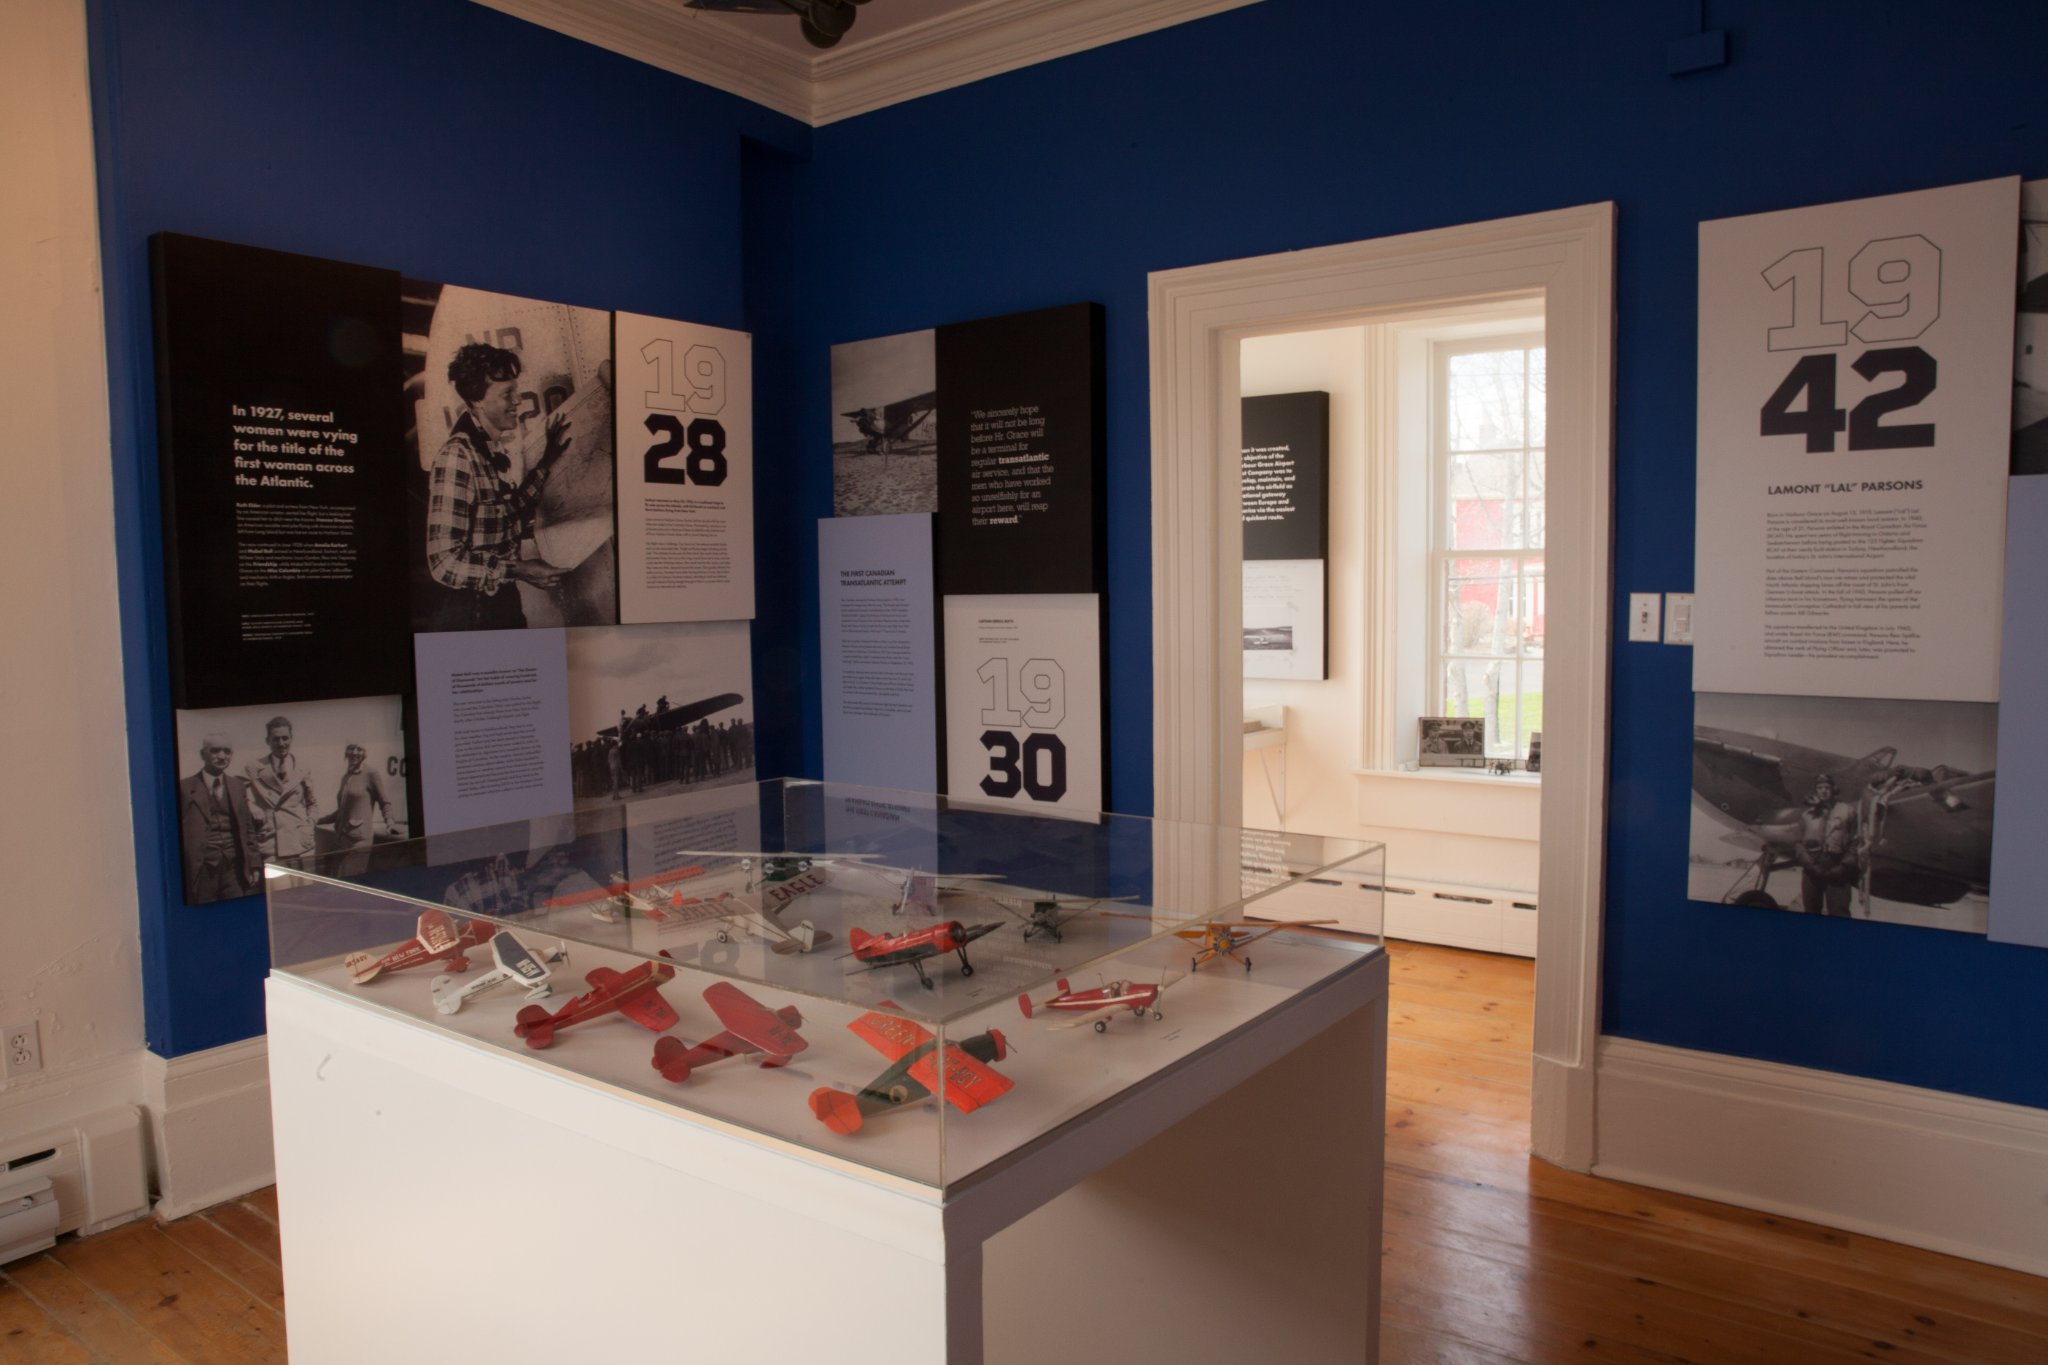 A coloured photograph of an exhibit space with storyboards posted on the walls and a glass case displays 12 small model planes.